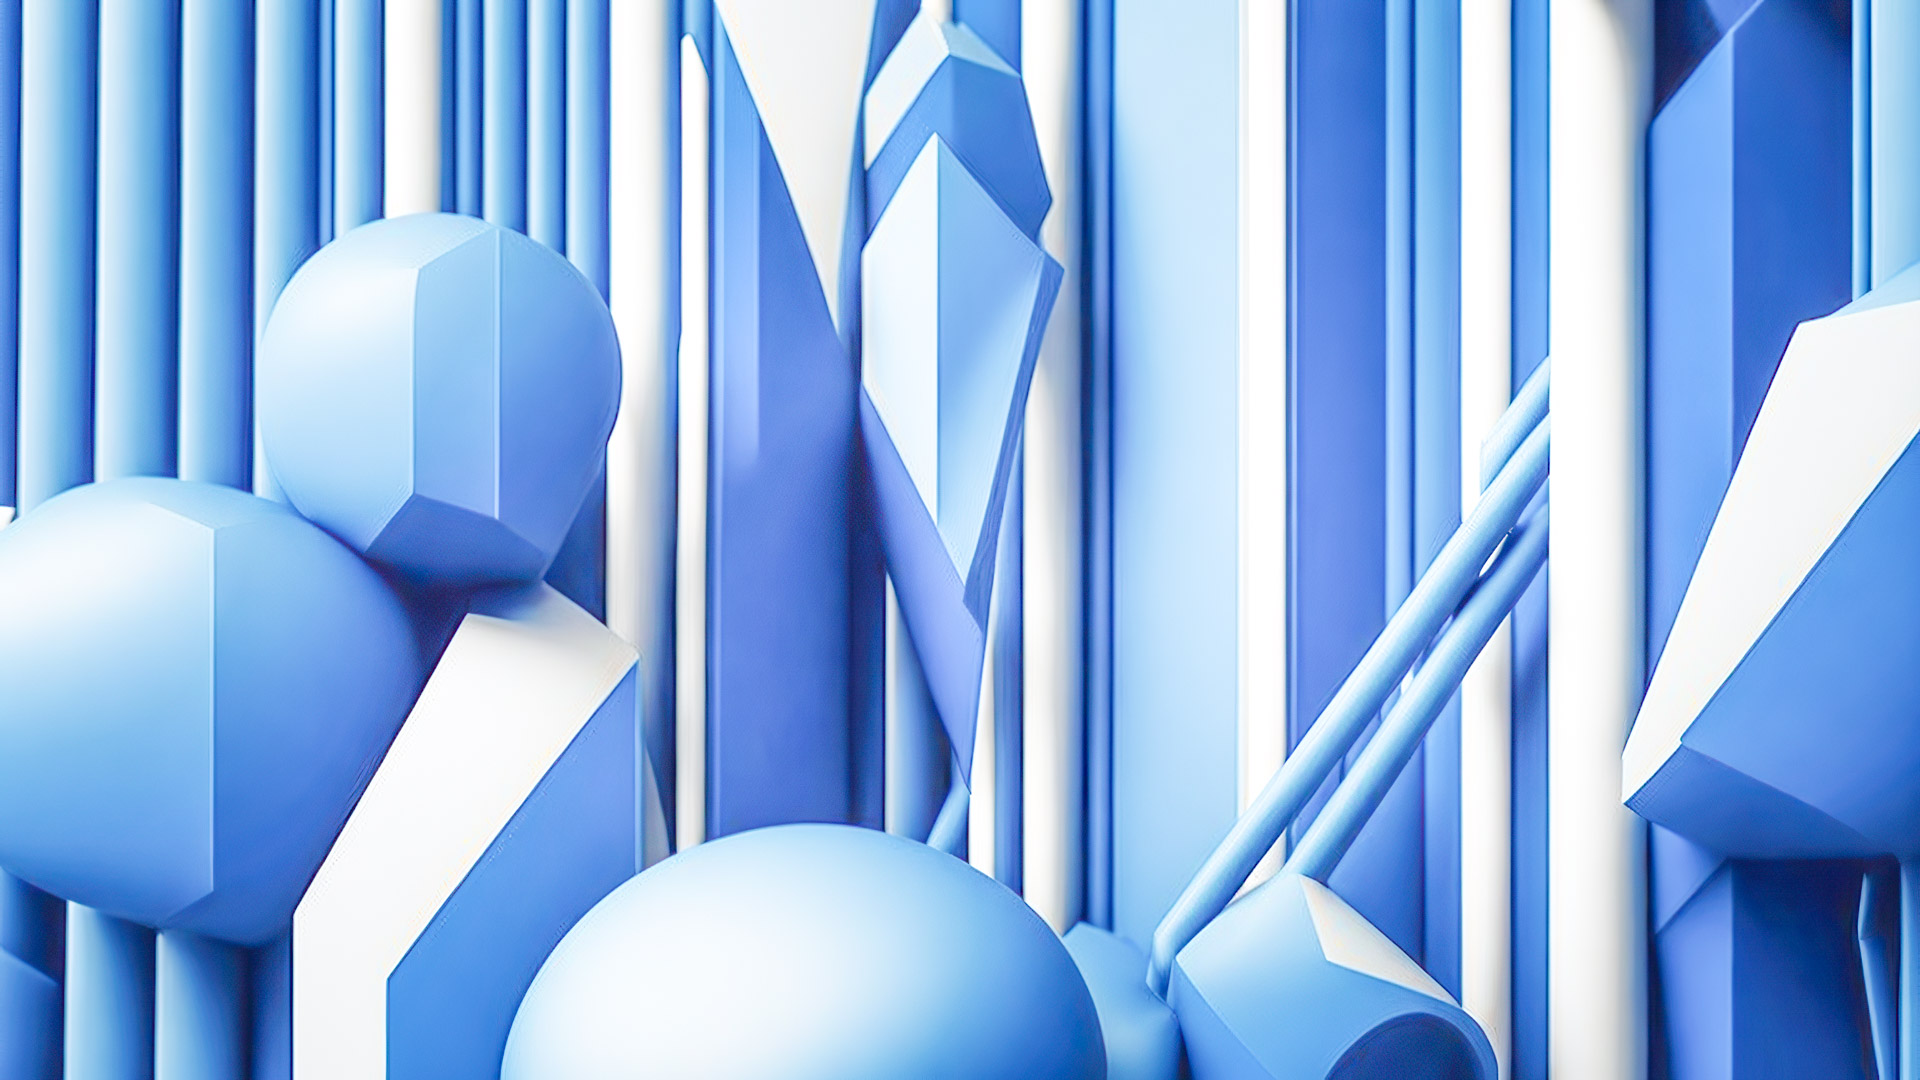 Experience dynamic visual arrest with an arrangement of blue poles in our abstract HD wallpaper collection for PC.